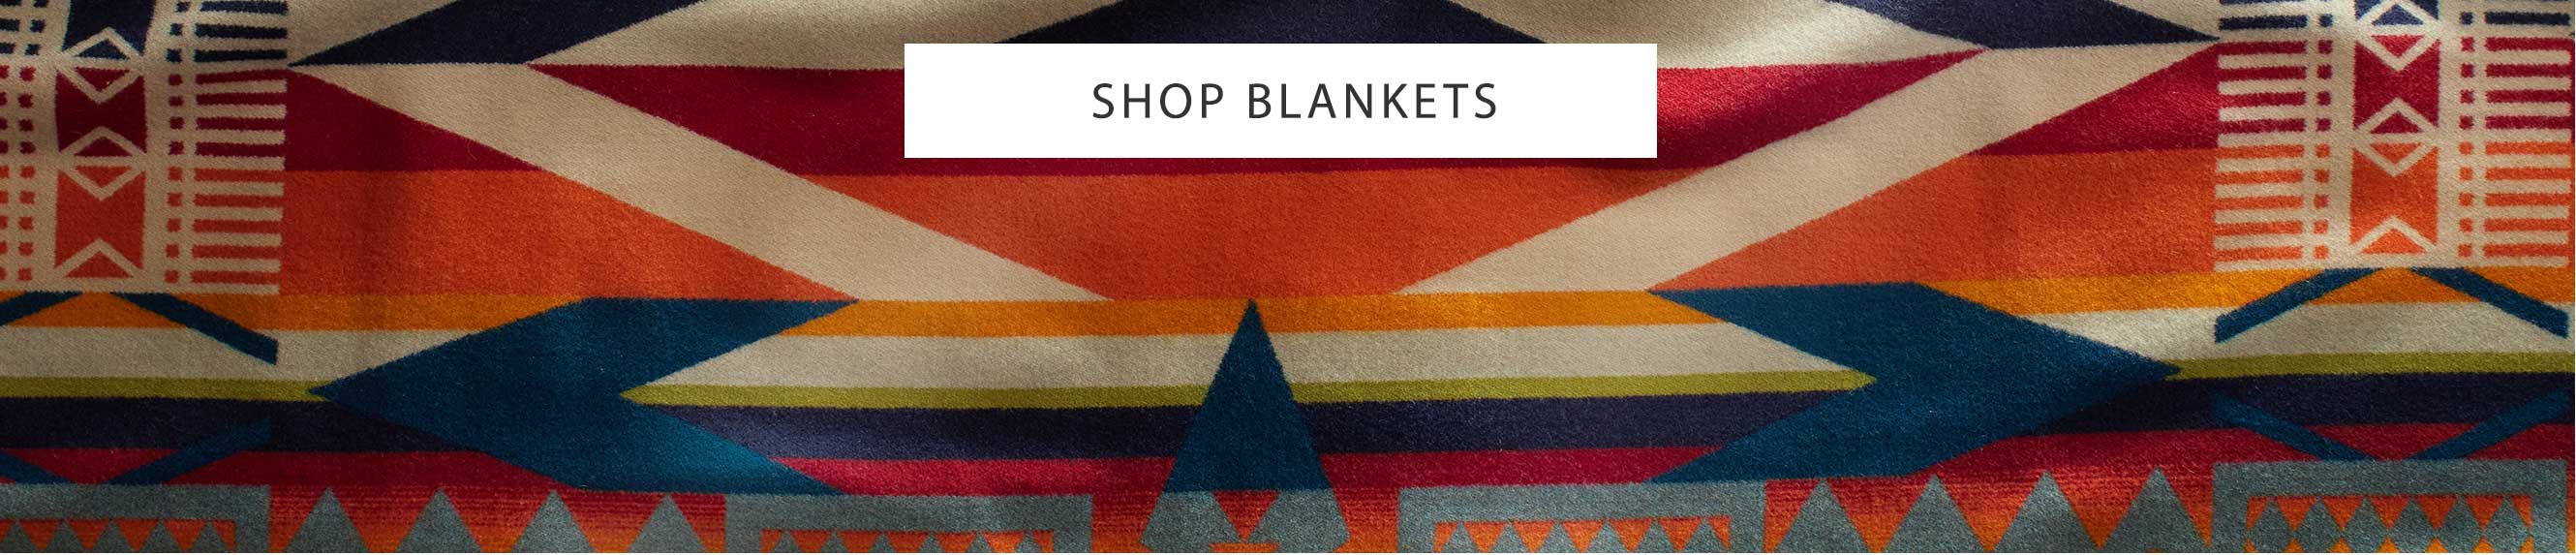 Cyber Sale - 25% Off Sitewide - Shop Blankets